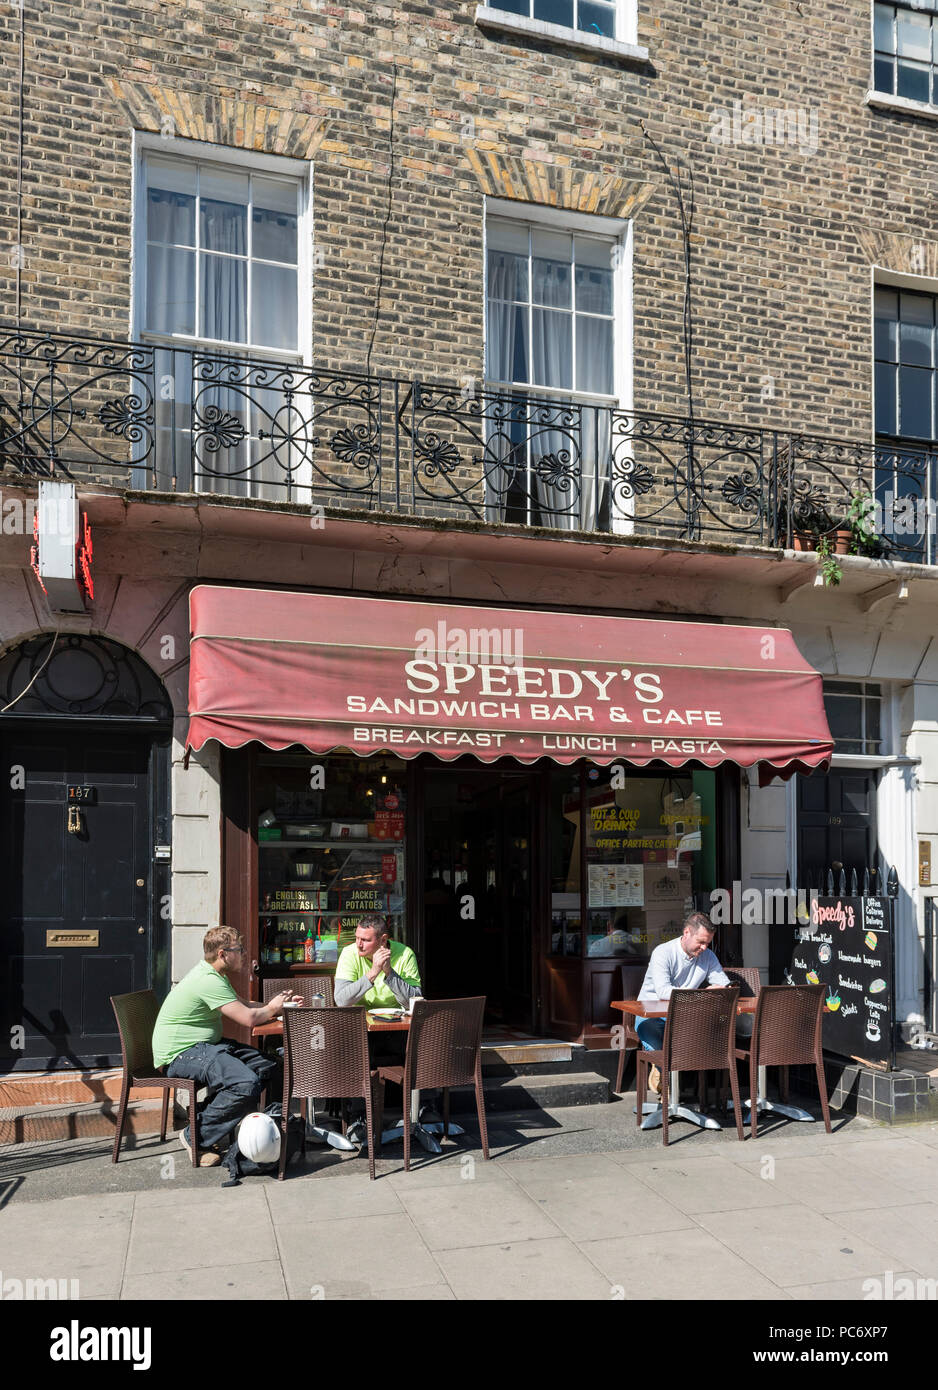 Speedy's cafe at North Gower Street standing for 221B Baker Street in BBC Sherlock series, London, England, UK Stock Photo